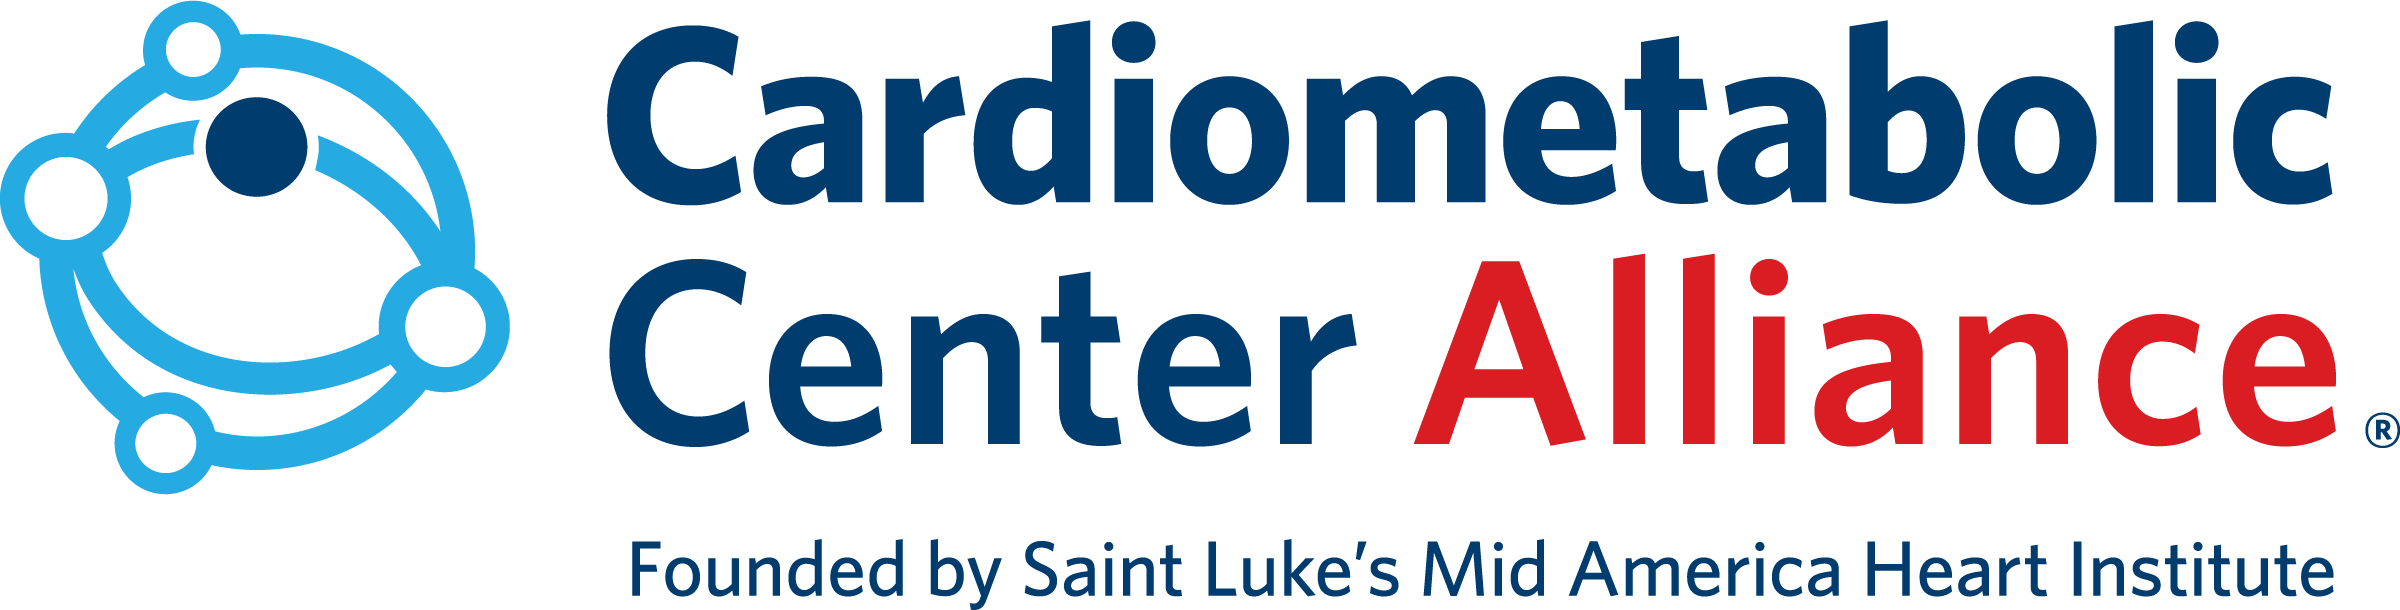 Cardiometabolic Center Alliance, Founded by Saint Luke's Mid America Heart Institute